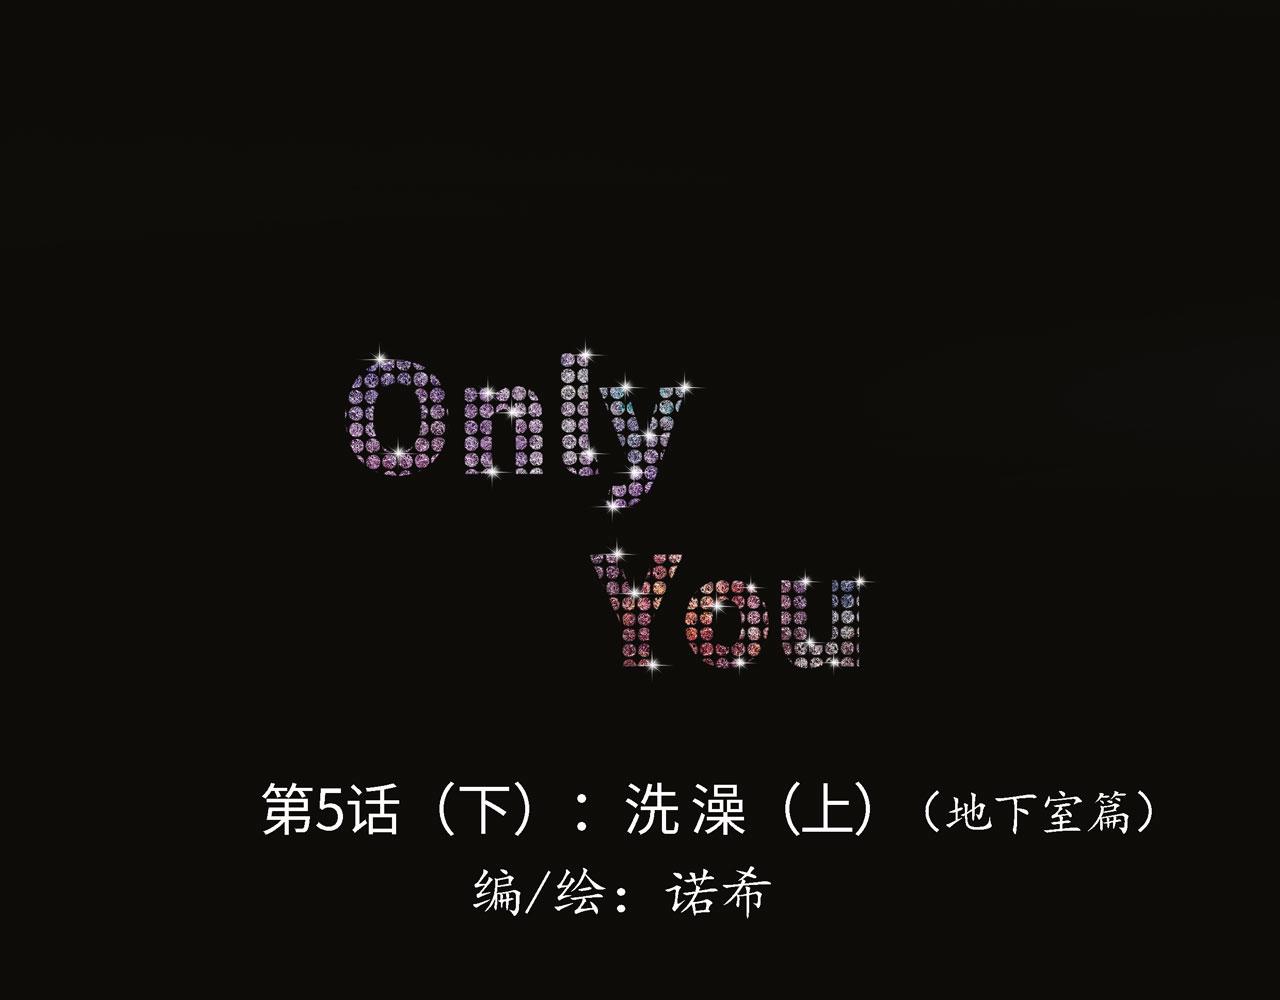 Only You - 補更：第5話（下）洗澡(1/2) - 1